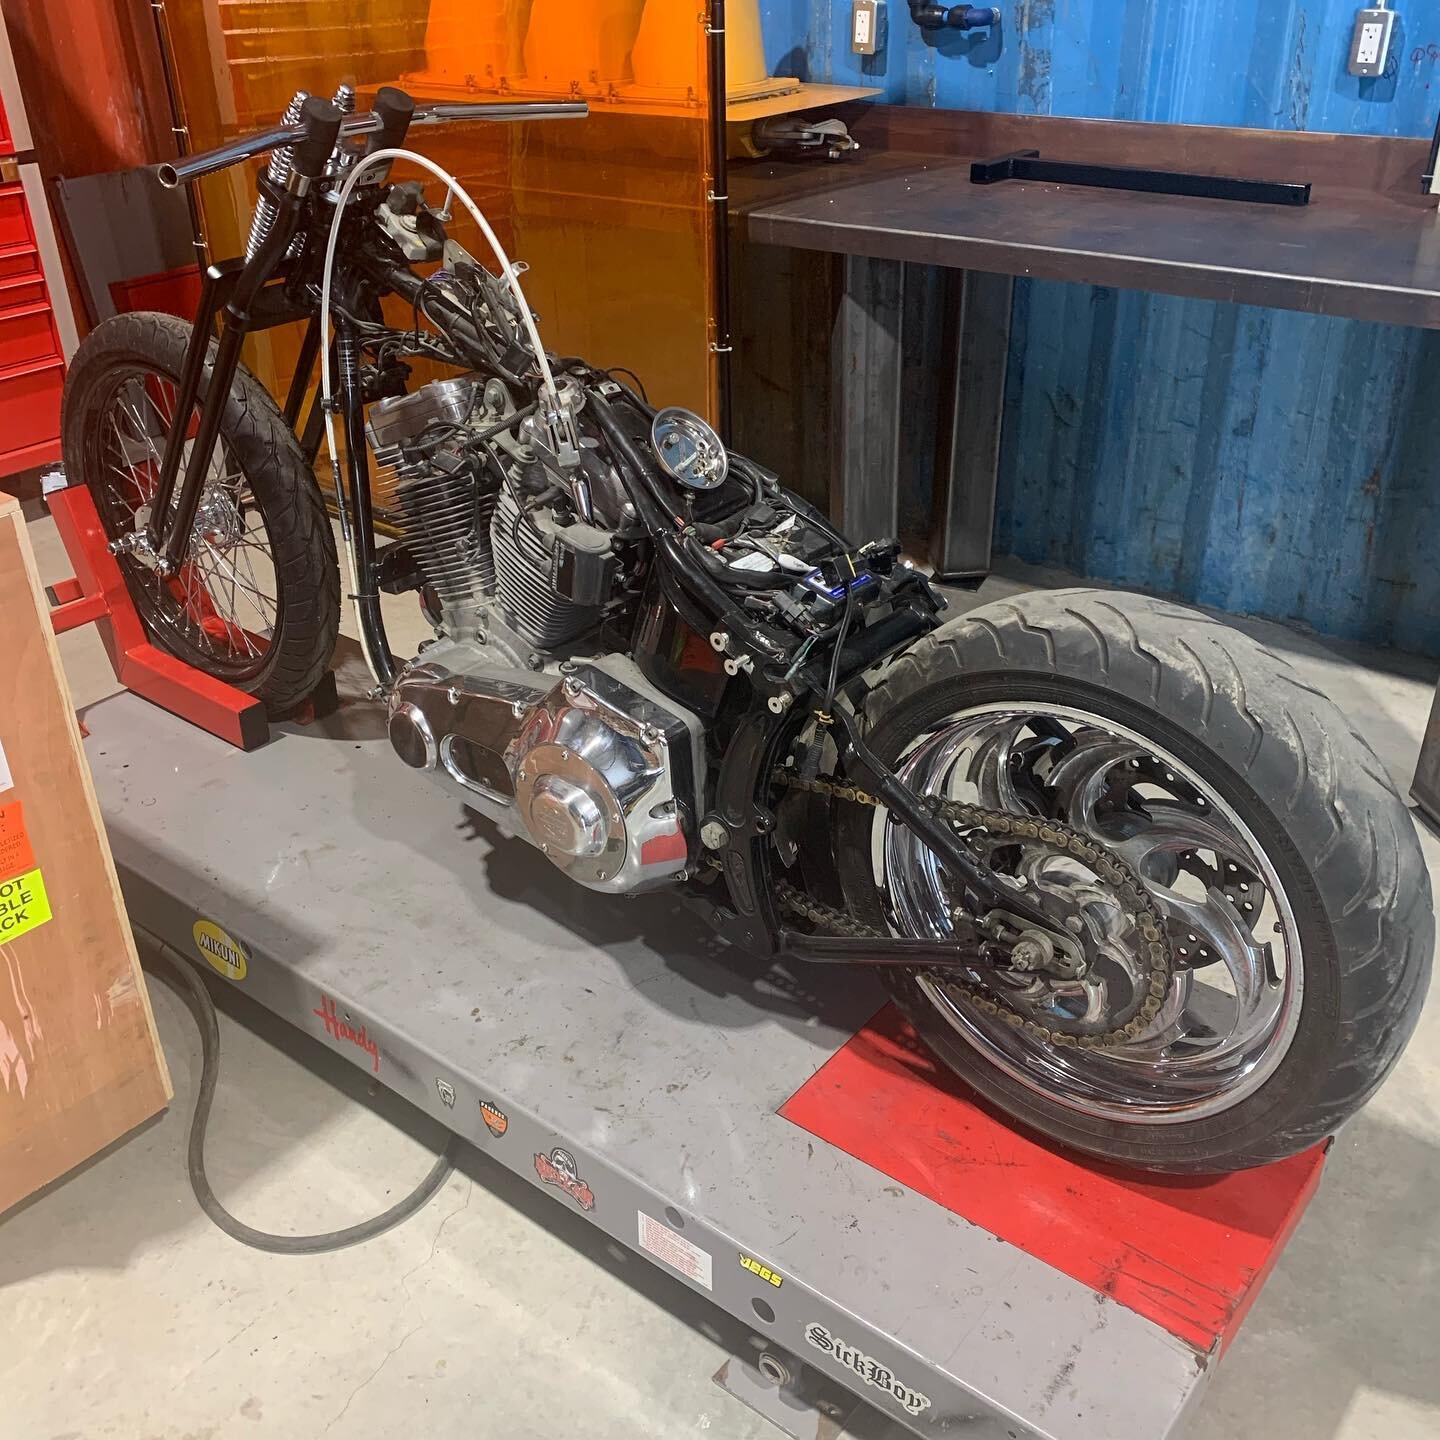 Nick getting his Softail back together-Porsche bike breakdown for Paint!@Paintwerx -Nostalgia Softail Mocked up-paint scheme with @blackwidowcustompaint today-Drag bike ready for Body moulding from  @blackwidowcustompaint-